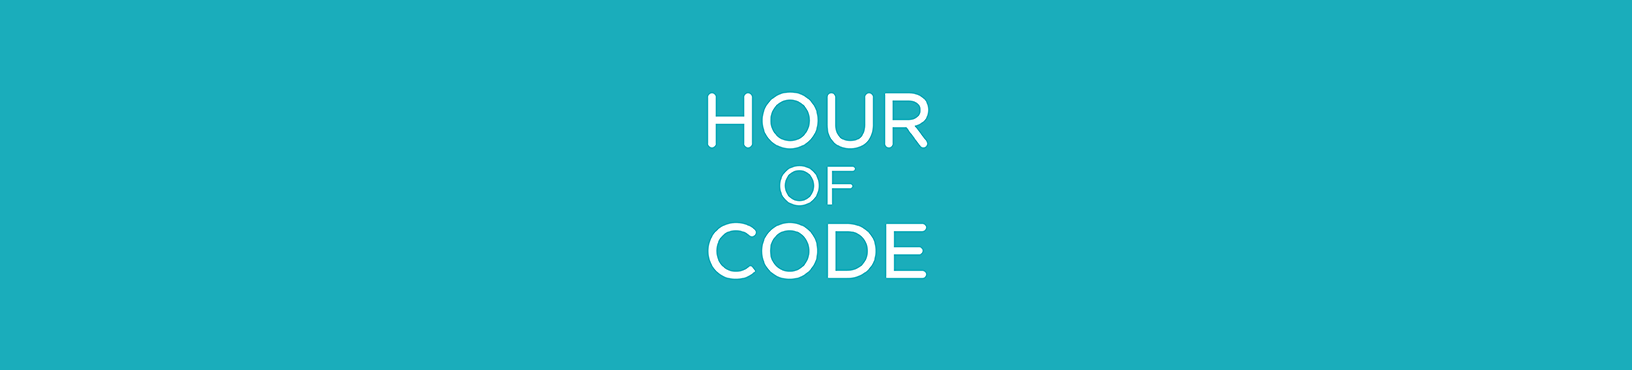 Learn Basic Lua Coding This Week In Our Hour Of Code Event Roblox Blog - roblox lua all codes